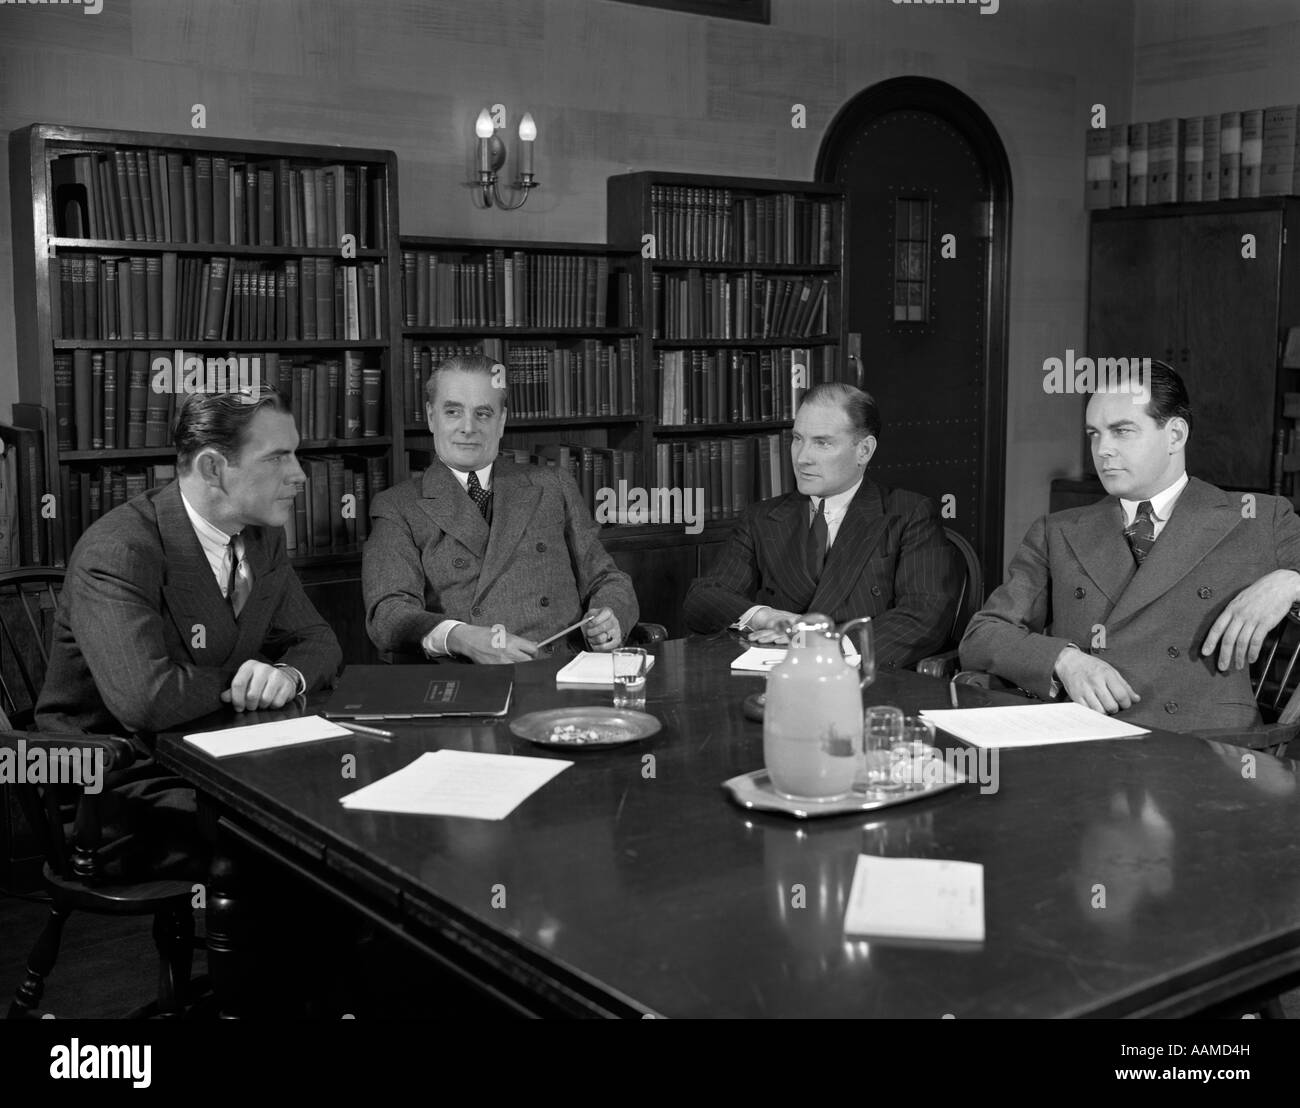 1940s GROUP FOUR BUSINESSMEN CORPORATE EXECUTIVES SIT AROUND CONFERENCE TABLE SERIOUS EXPRESSIONS MEETING DECISION PAPERS Stock Photo